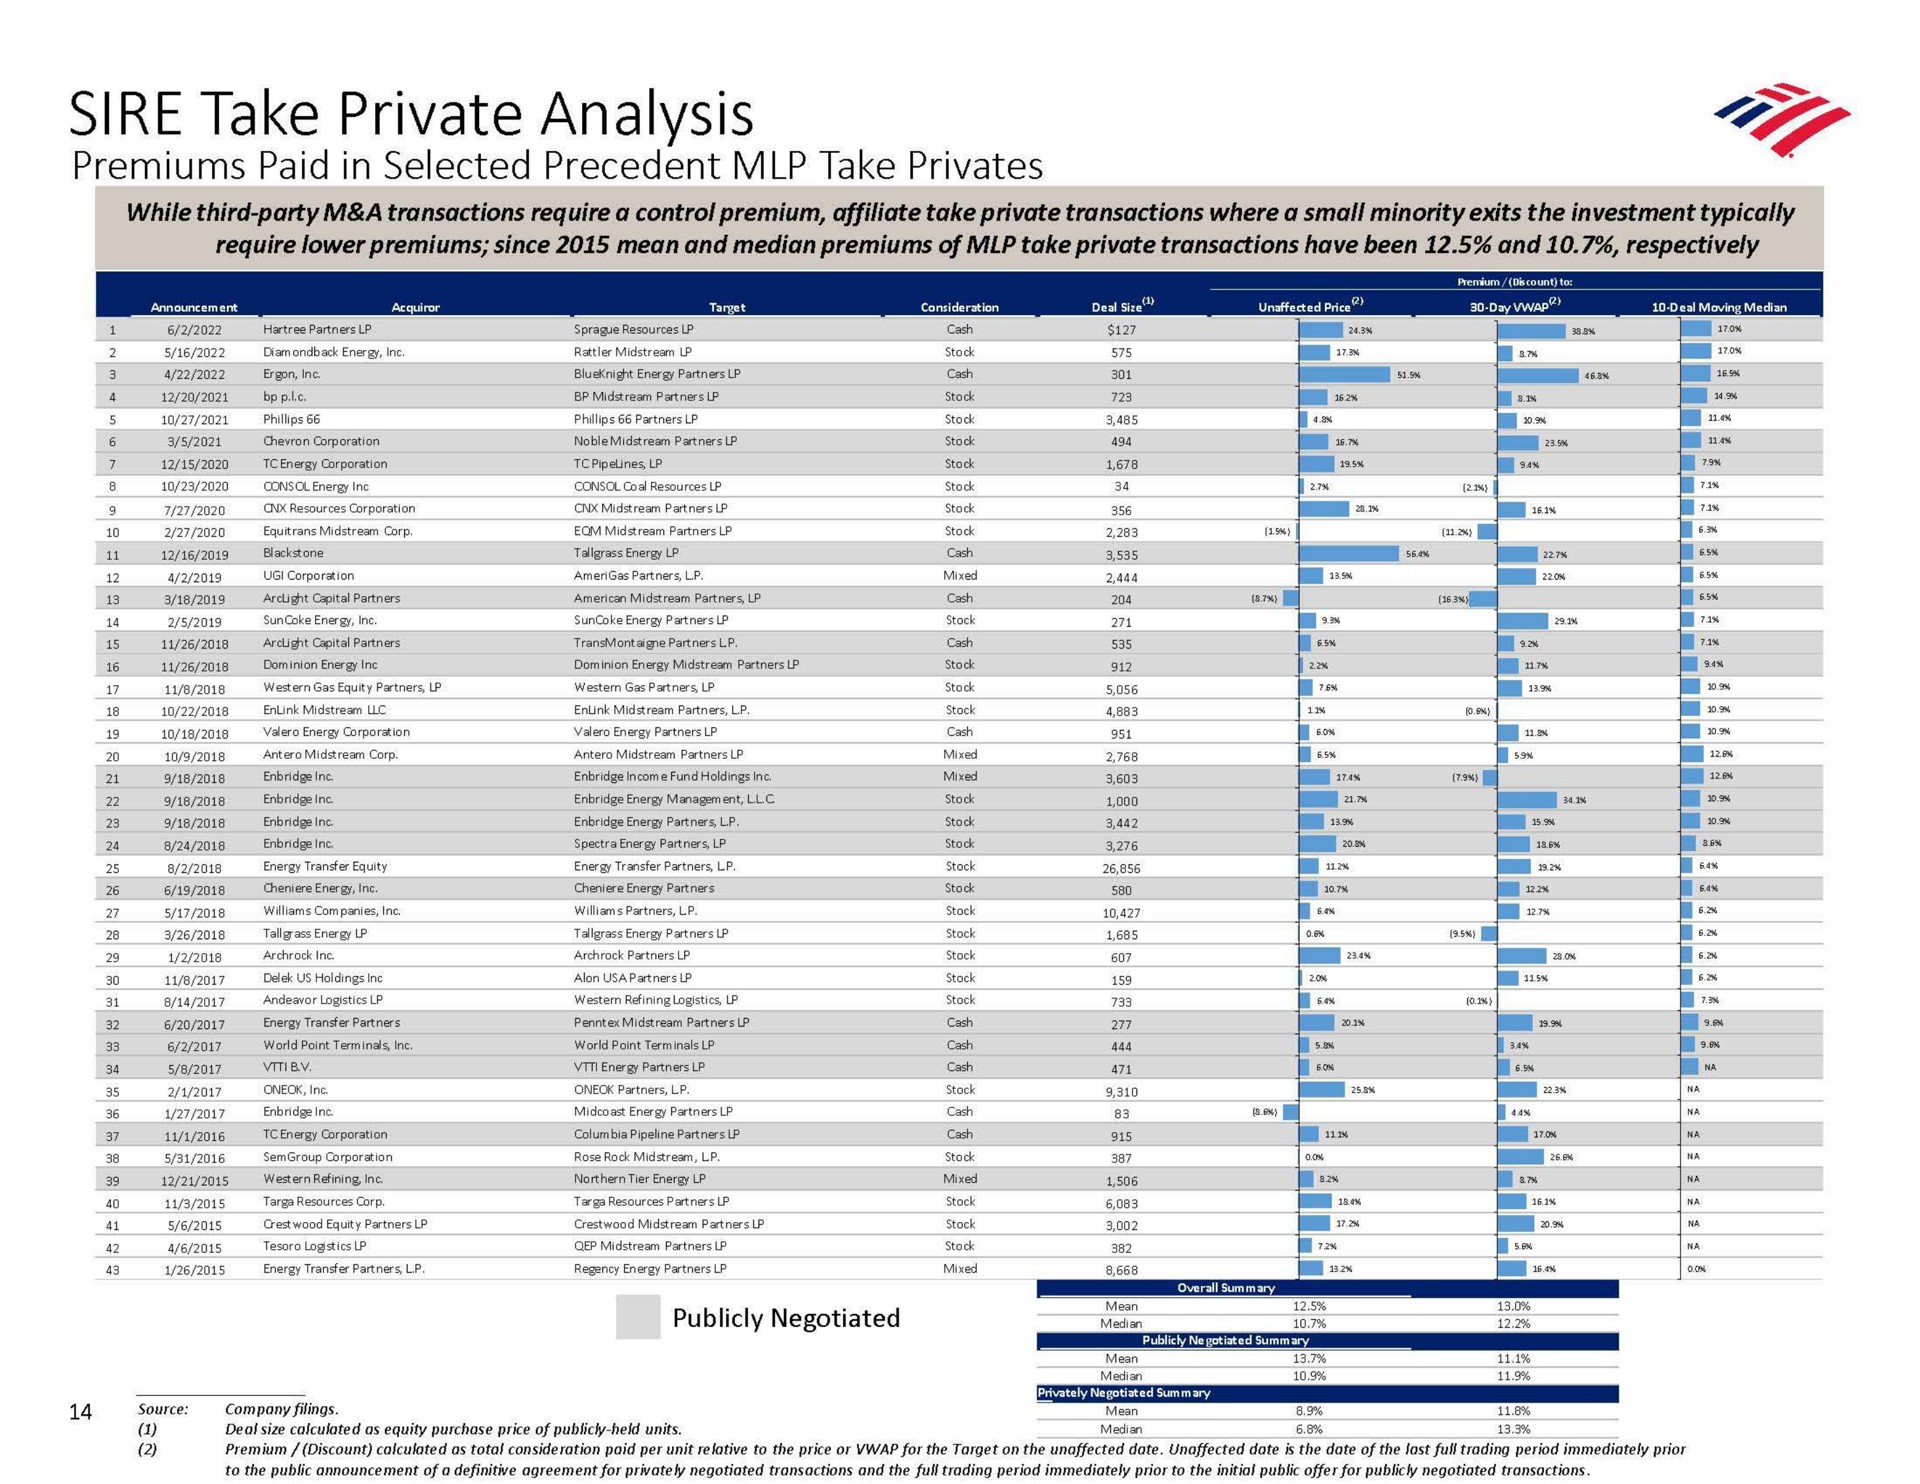 sire take private analysis premiums paid in selected precedent take privates a | Bank of America